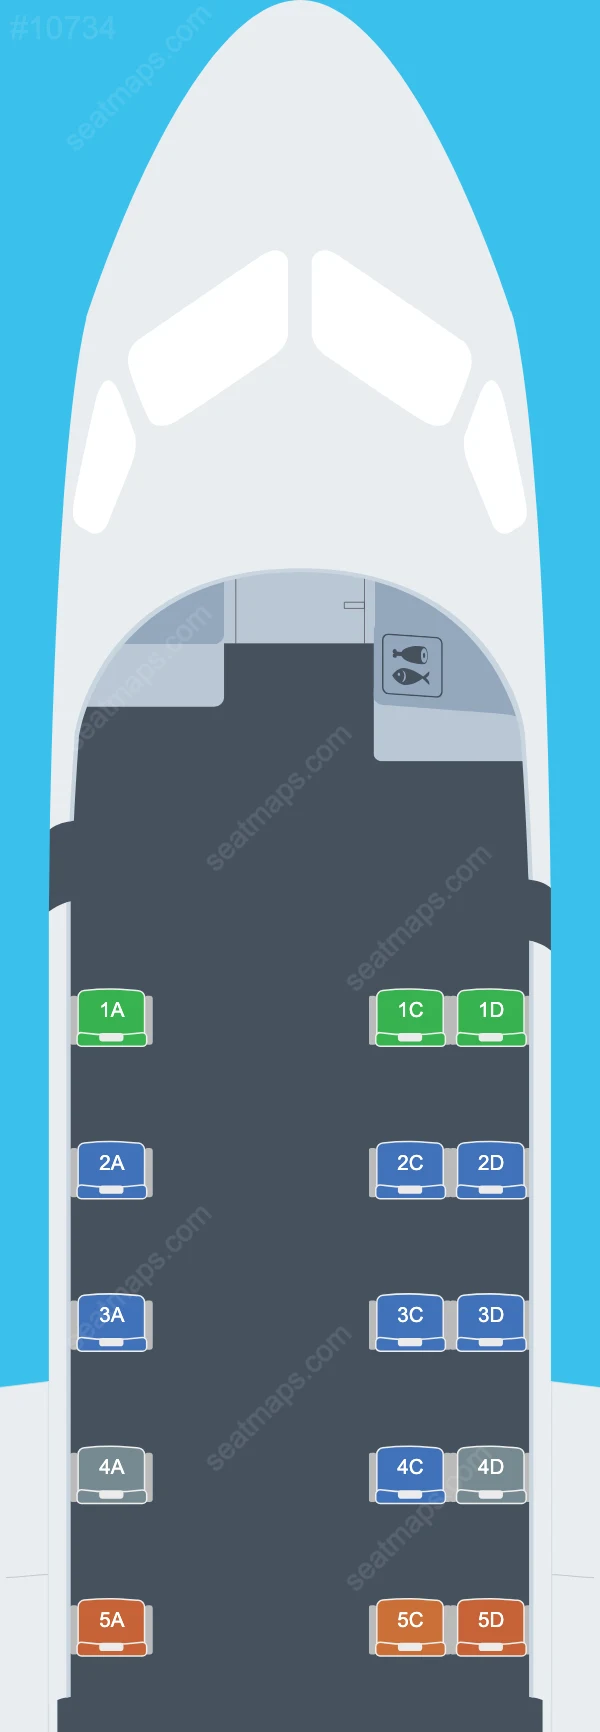 Pascan Aviation Saab S340 seatmap mobile preview